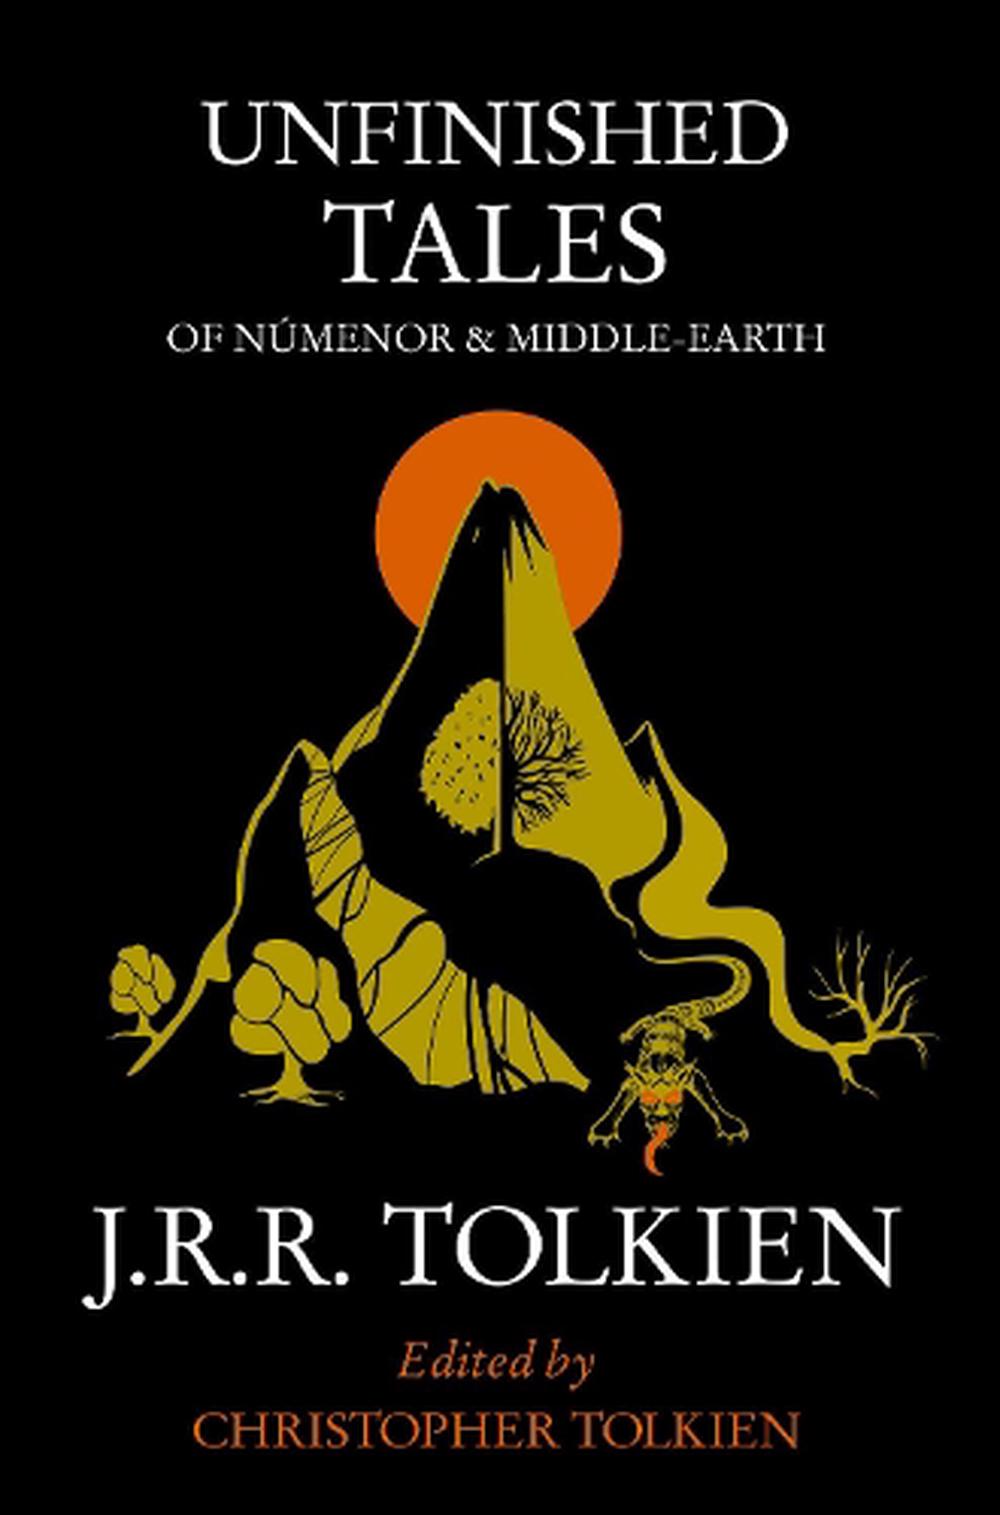 unfinished-tales-by-j-r-r-tolkien-paperback-9780261102163-buy-online-at-the-nile